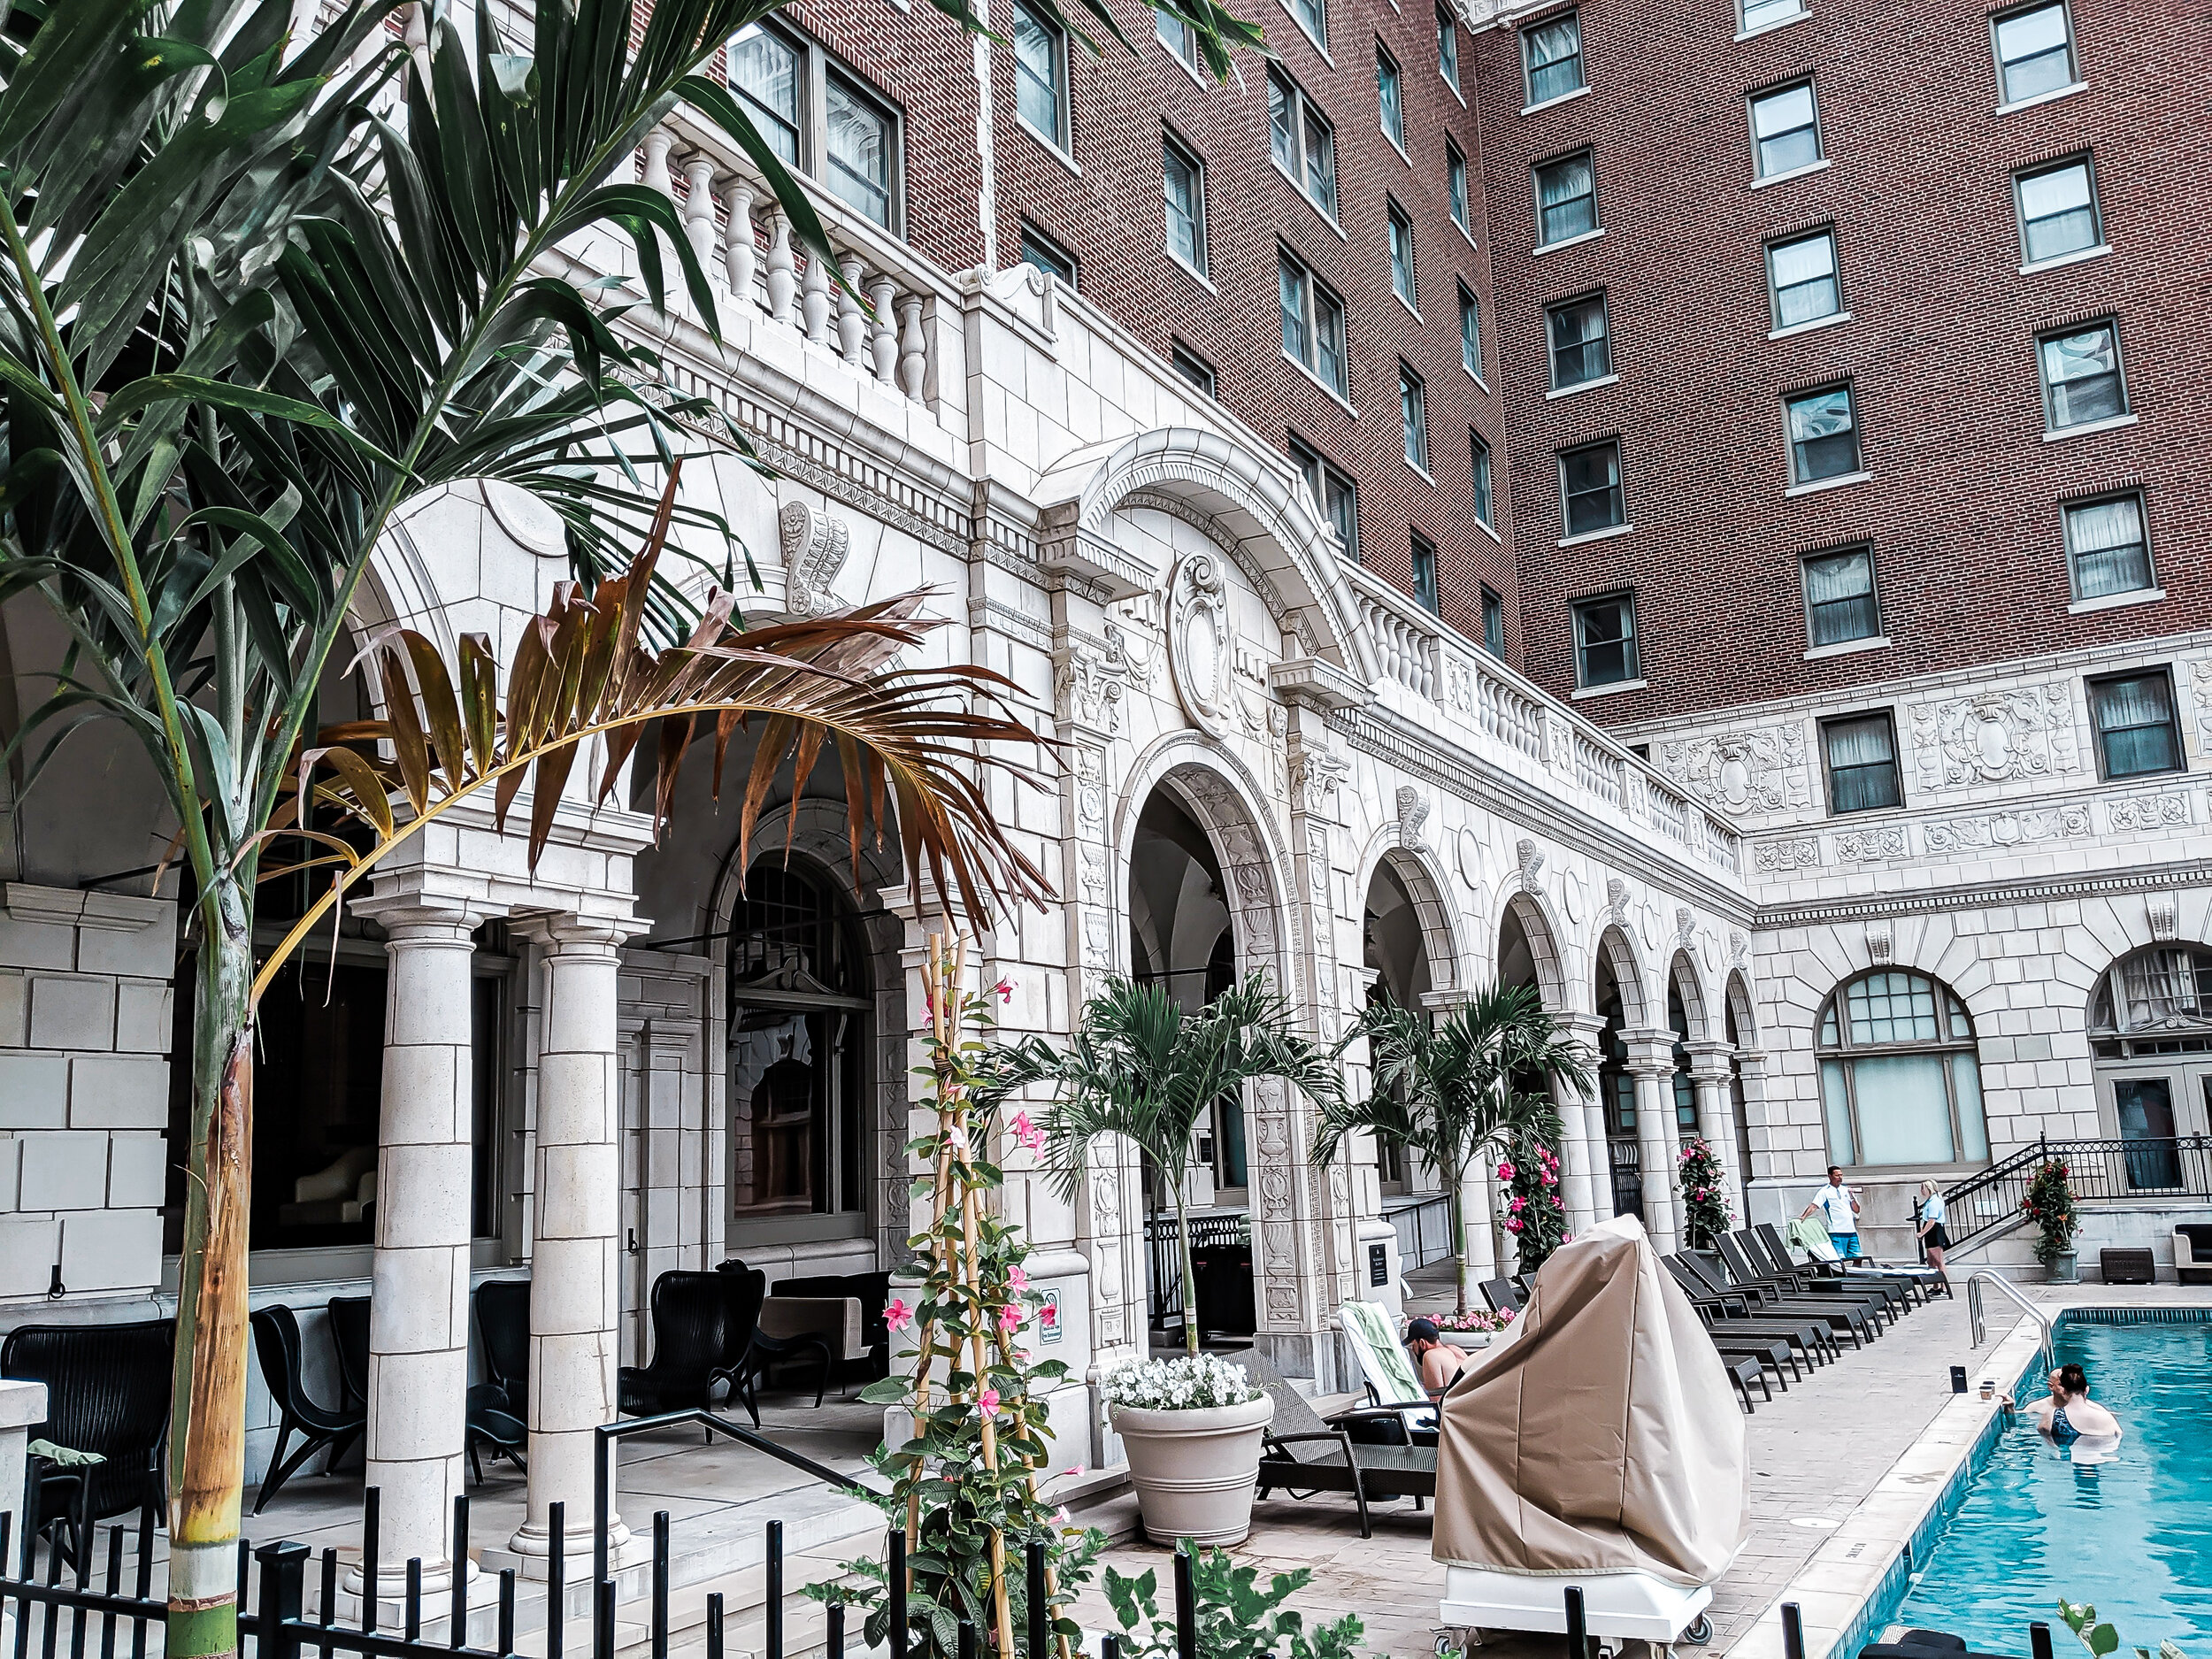 St. Louis Weekend Travel Guide - Chase Park Plaza Hotel